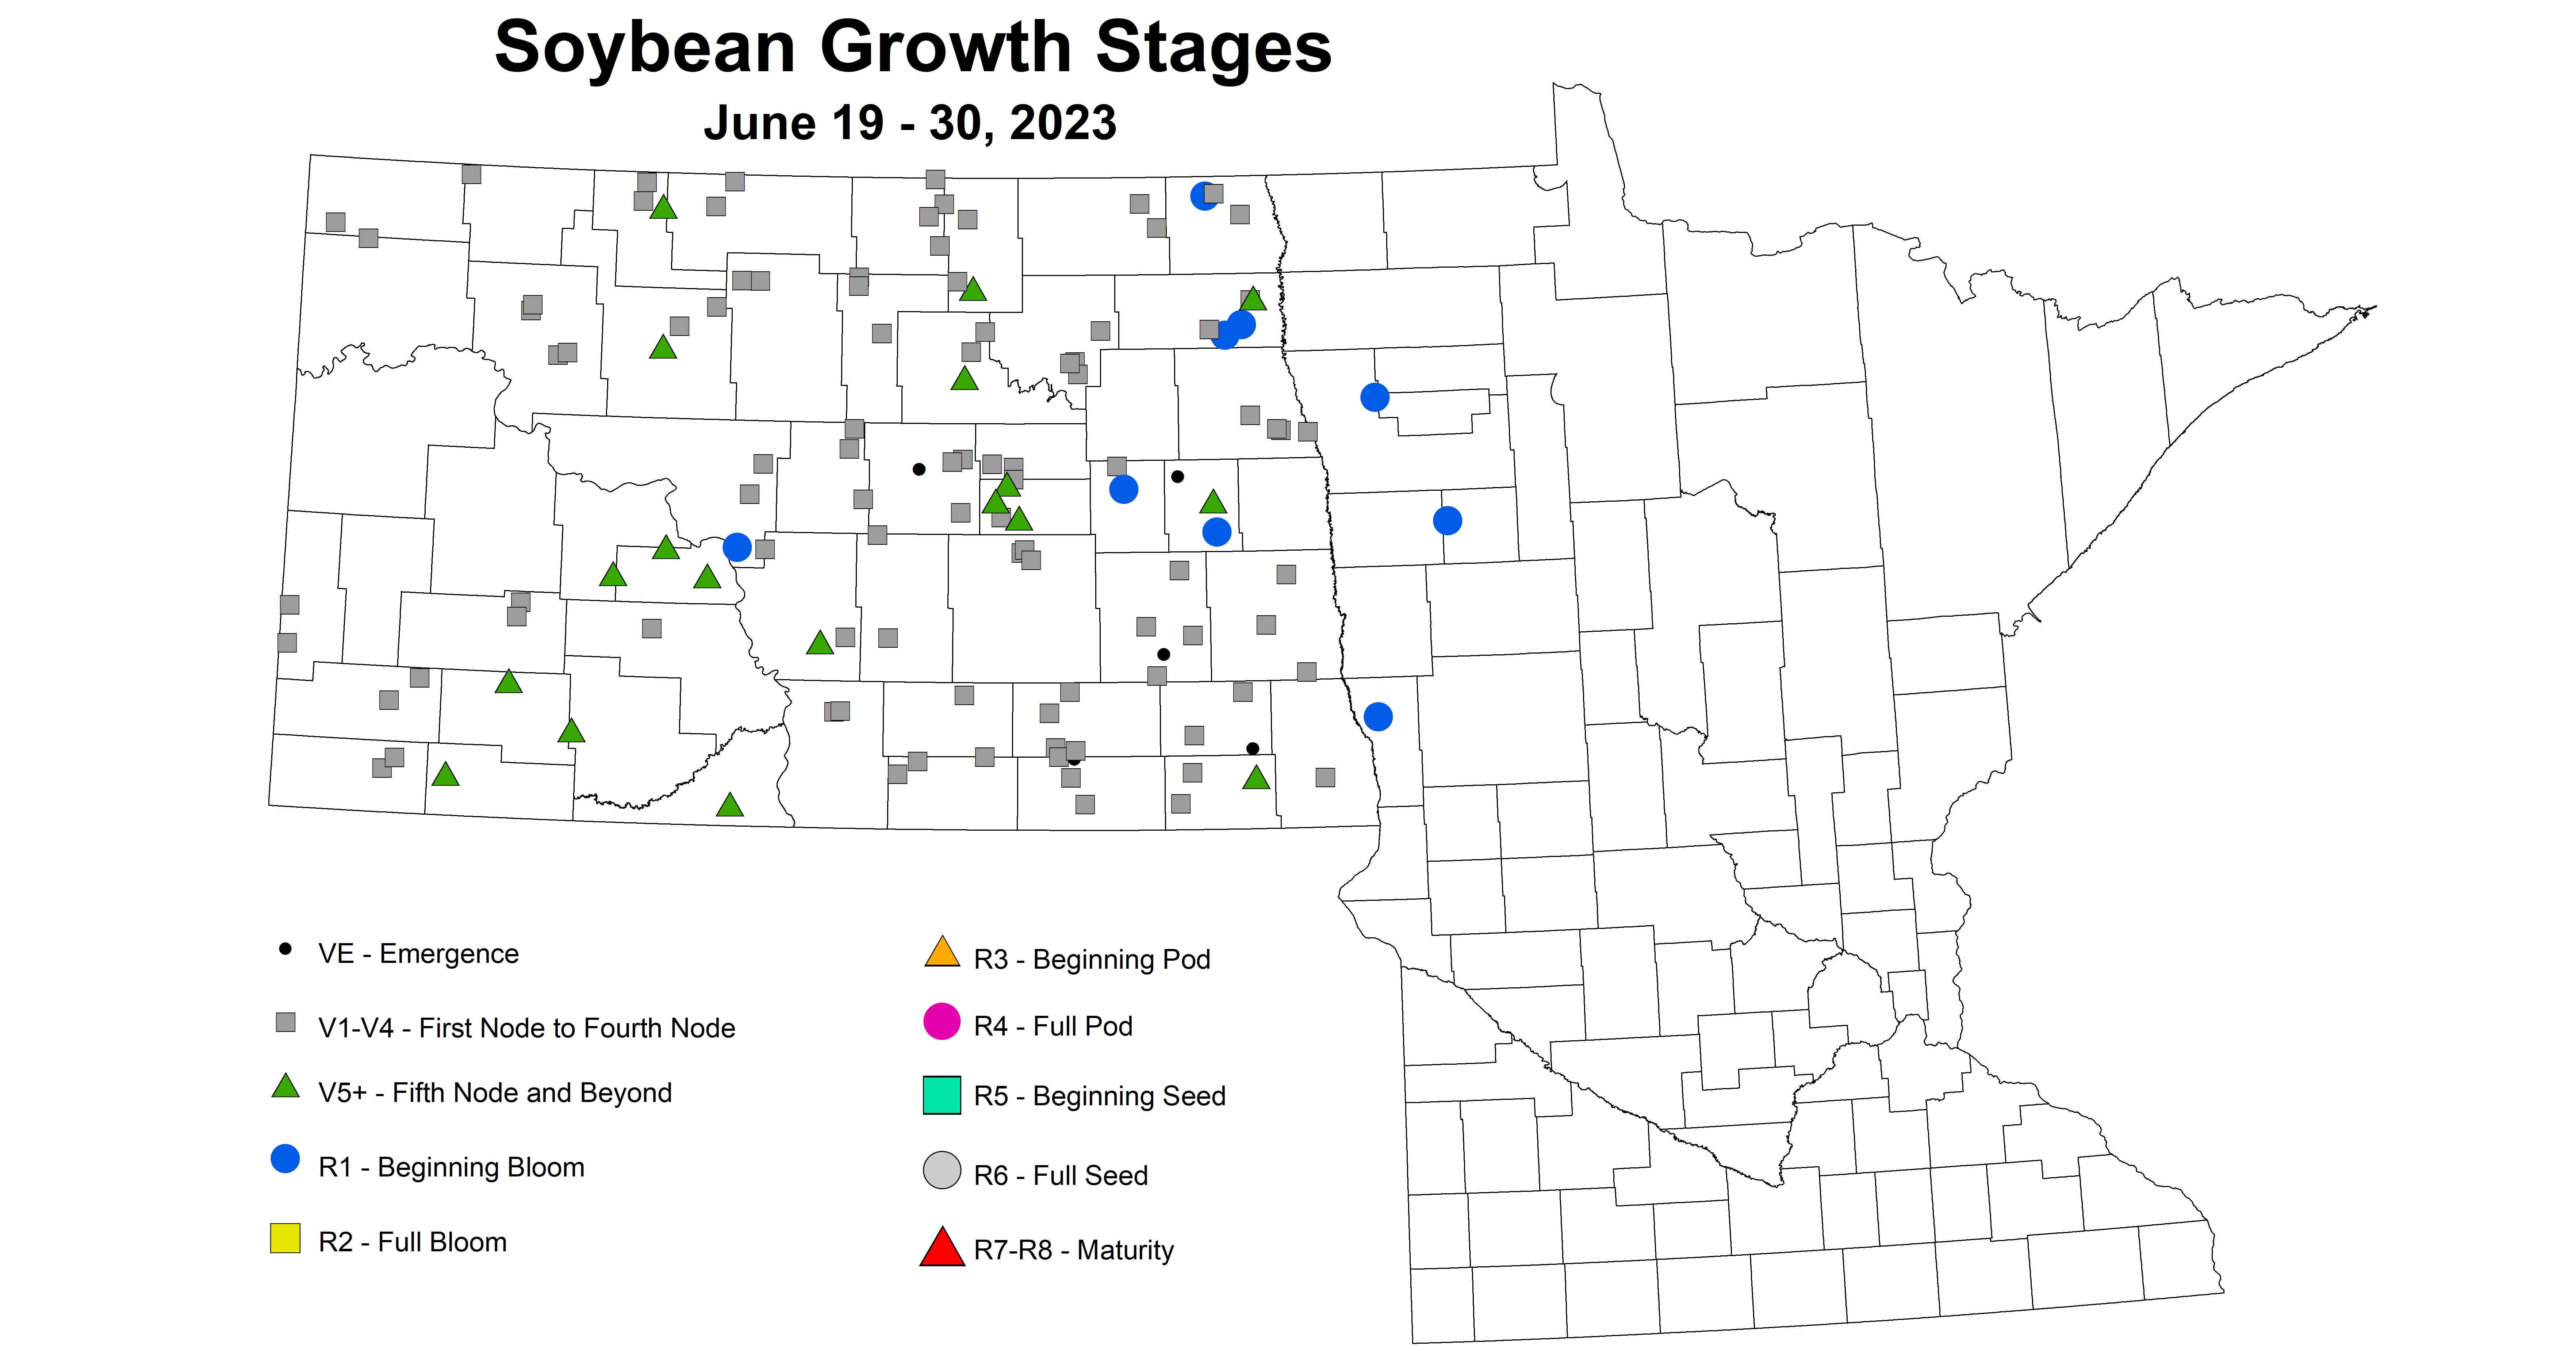 soybean growth stages June 19-30 2023